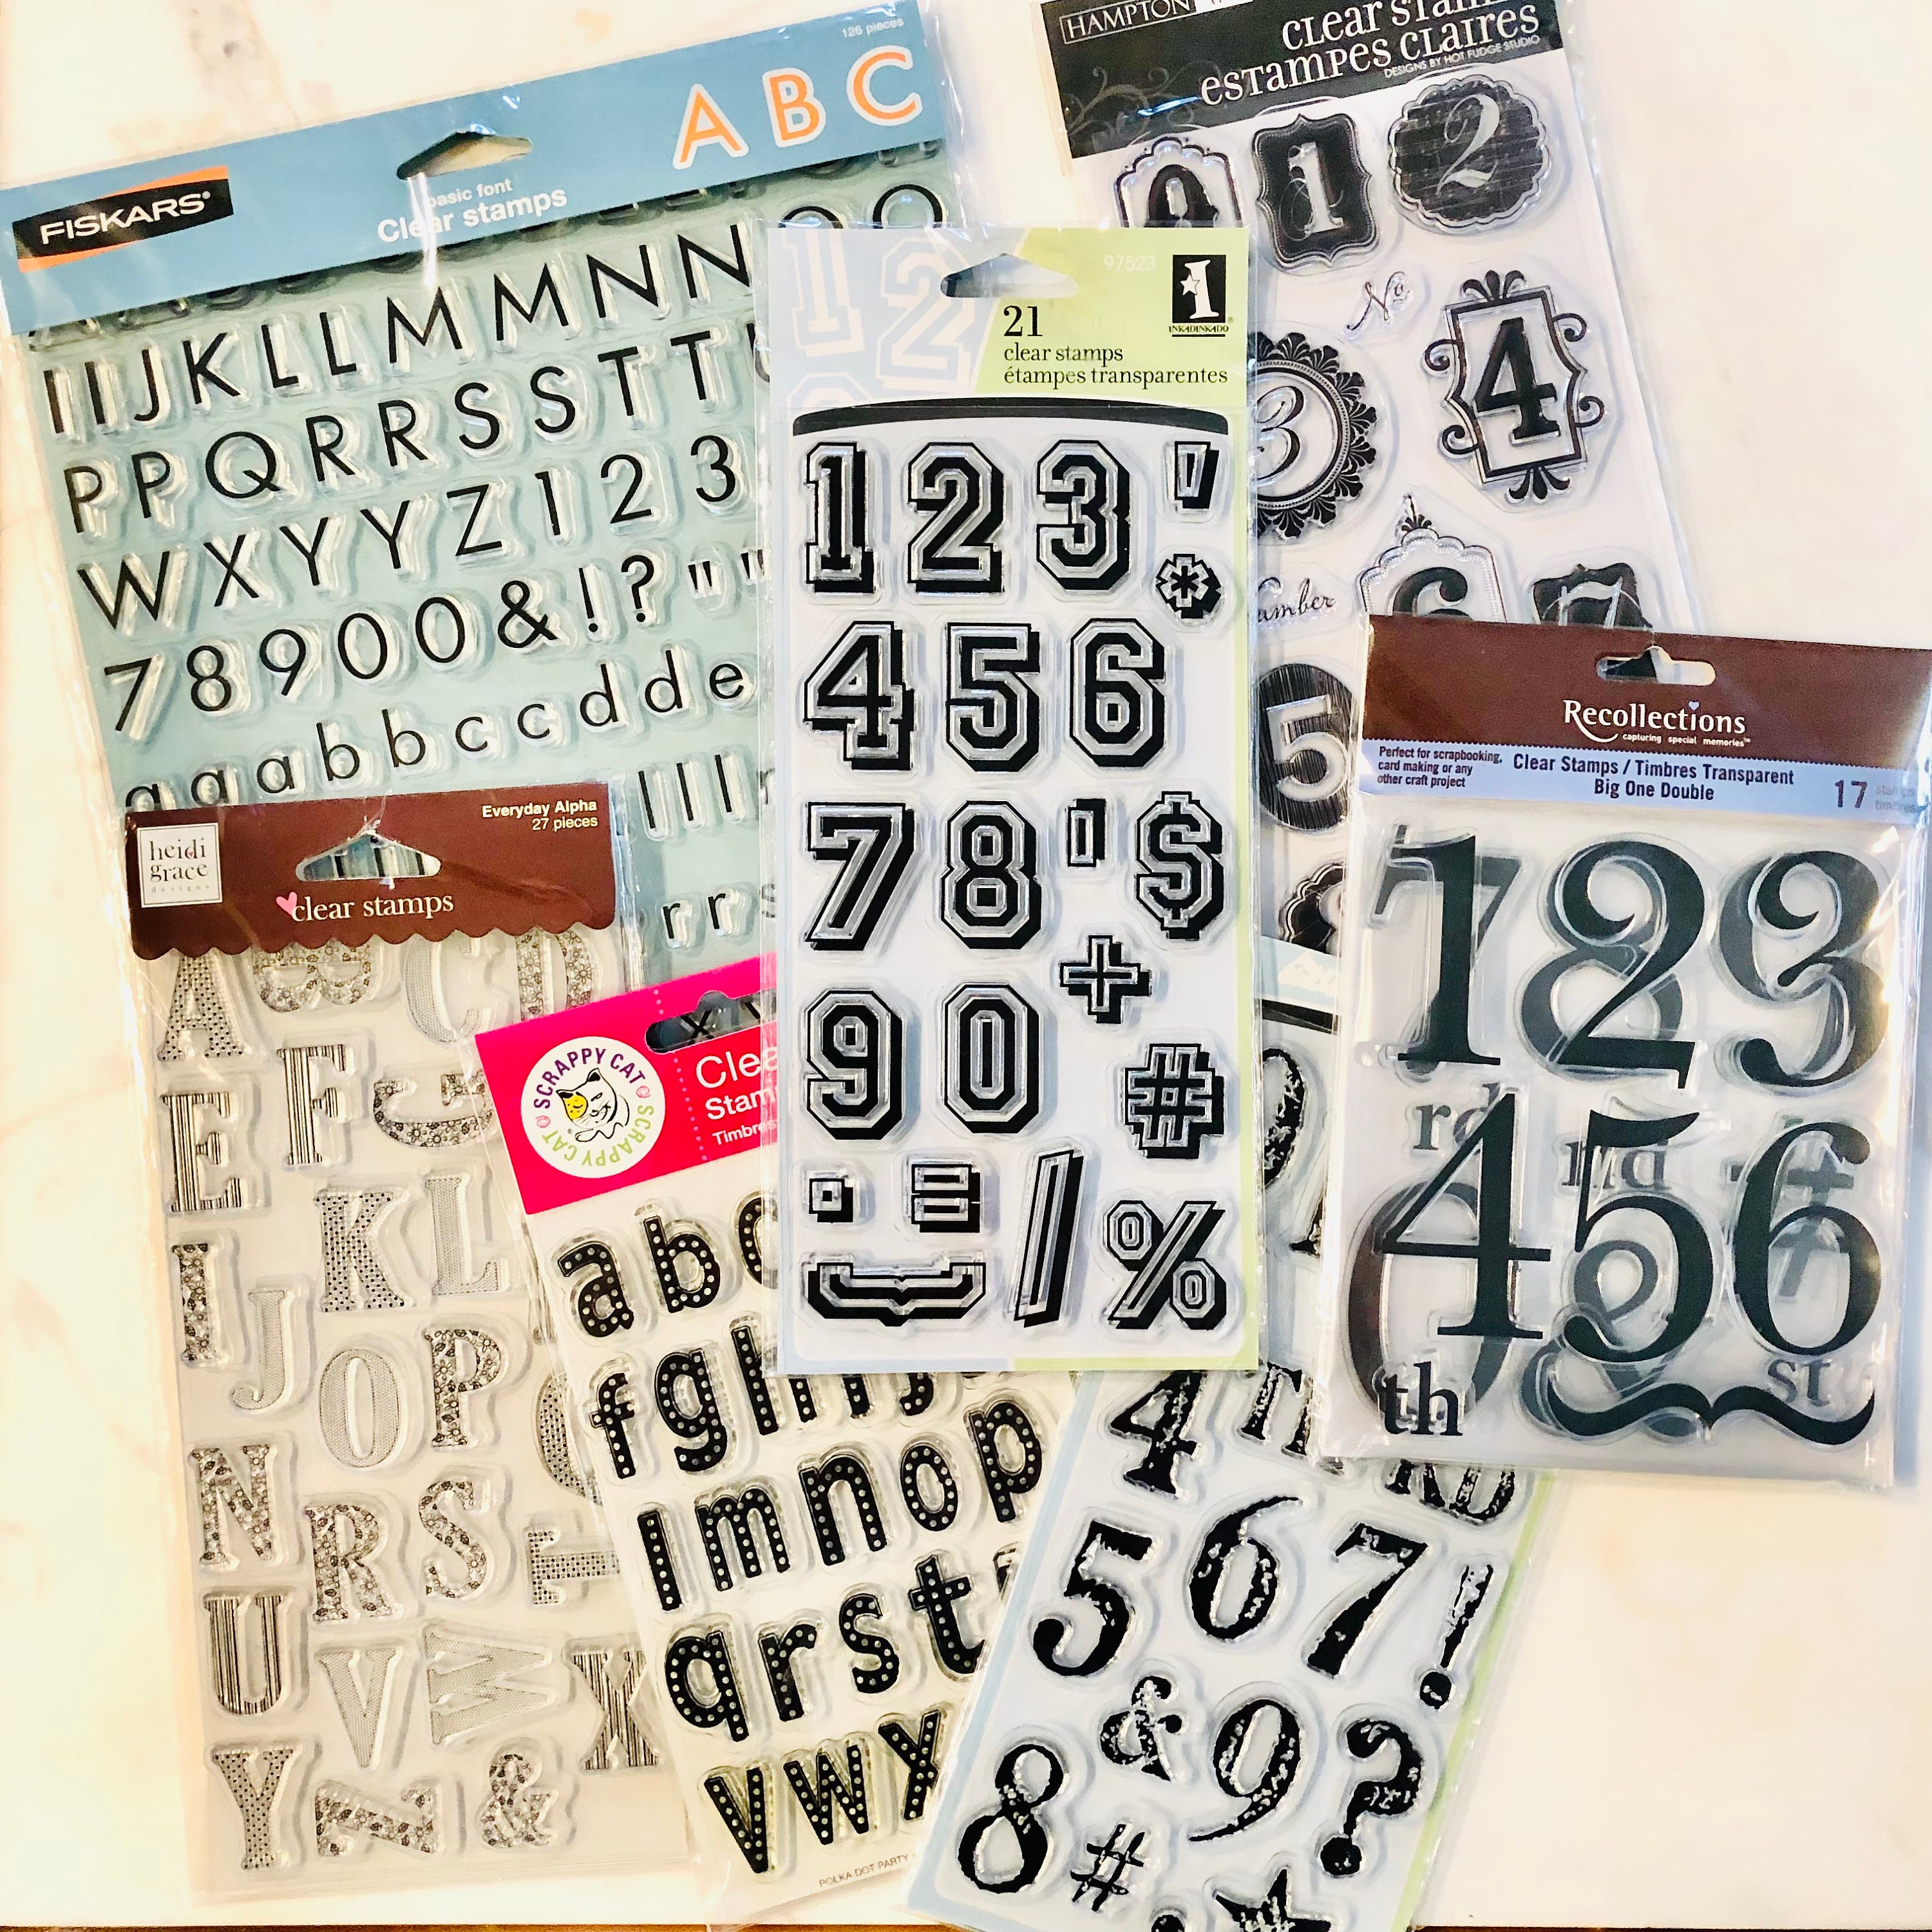 4 Pcs Cling Stamp Set DIY 1-10 Rubber Stamps Transparent A to Z Letter Stamps Craft Alphabet Stamps Clear Decorative Clear Stamps with Acrylic Stamp Block for Scrapbooking Journaling Photo Album Card 